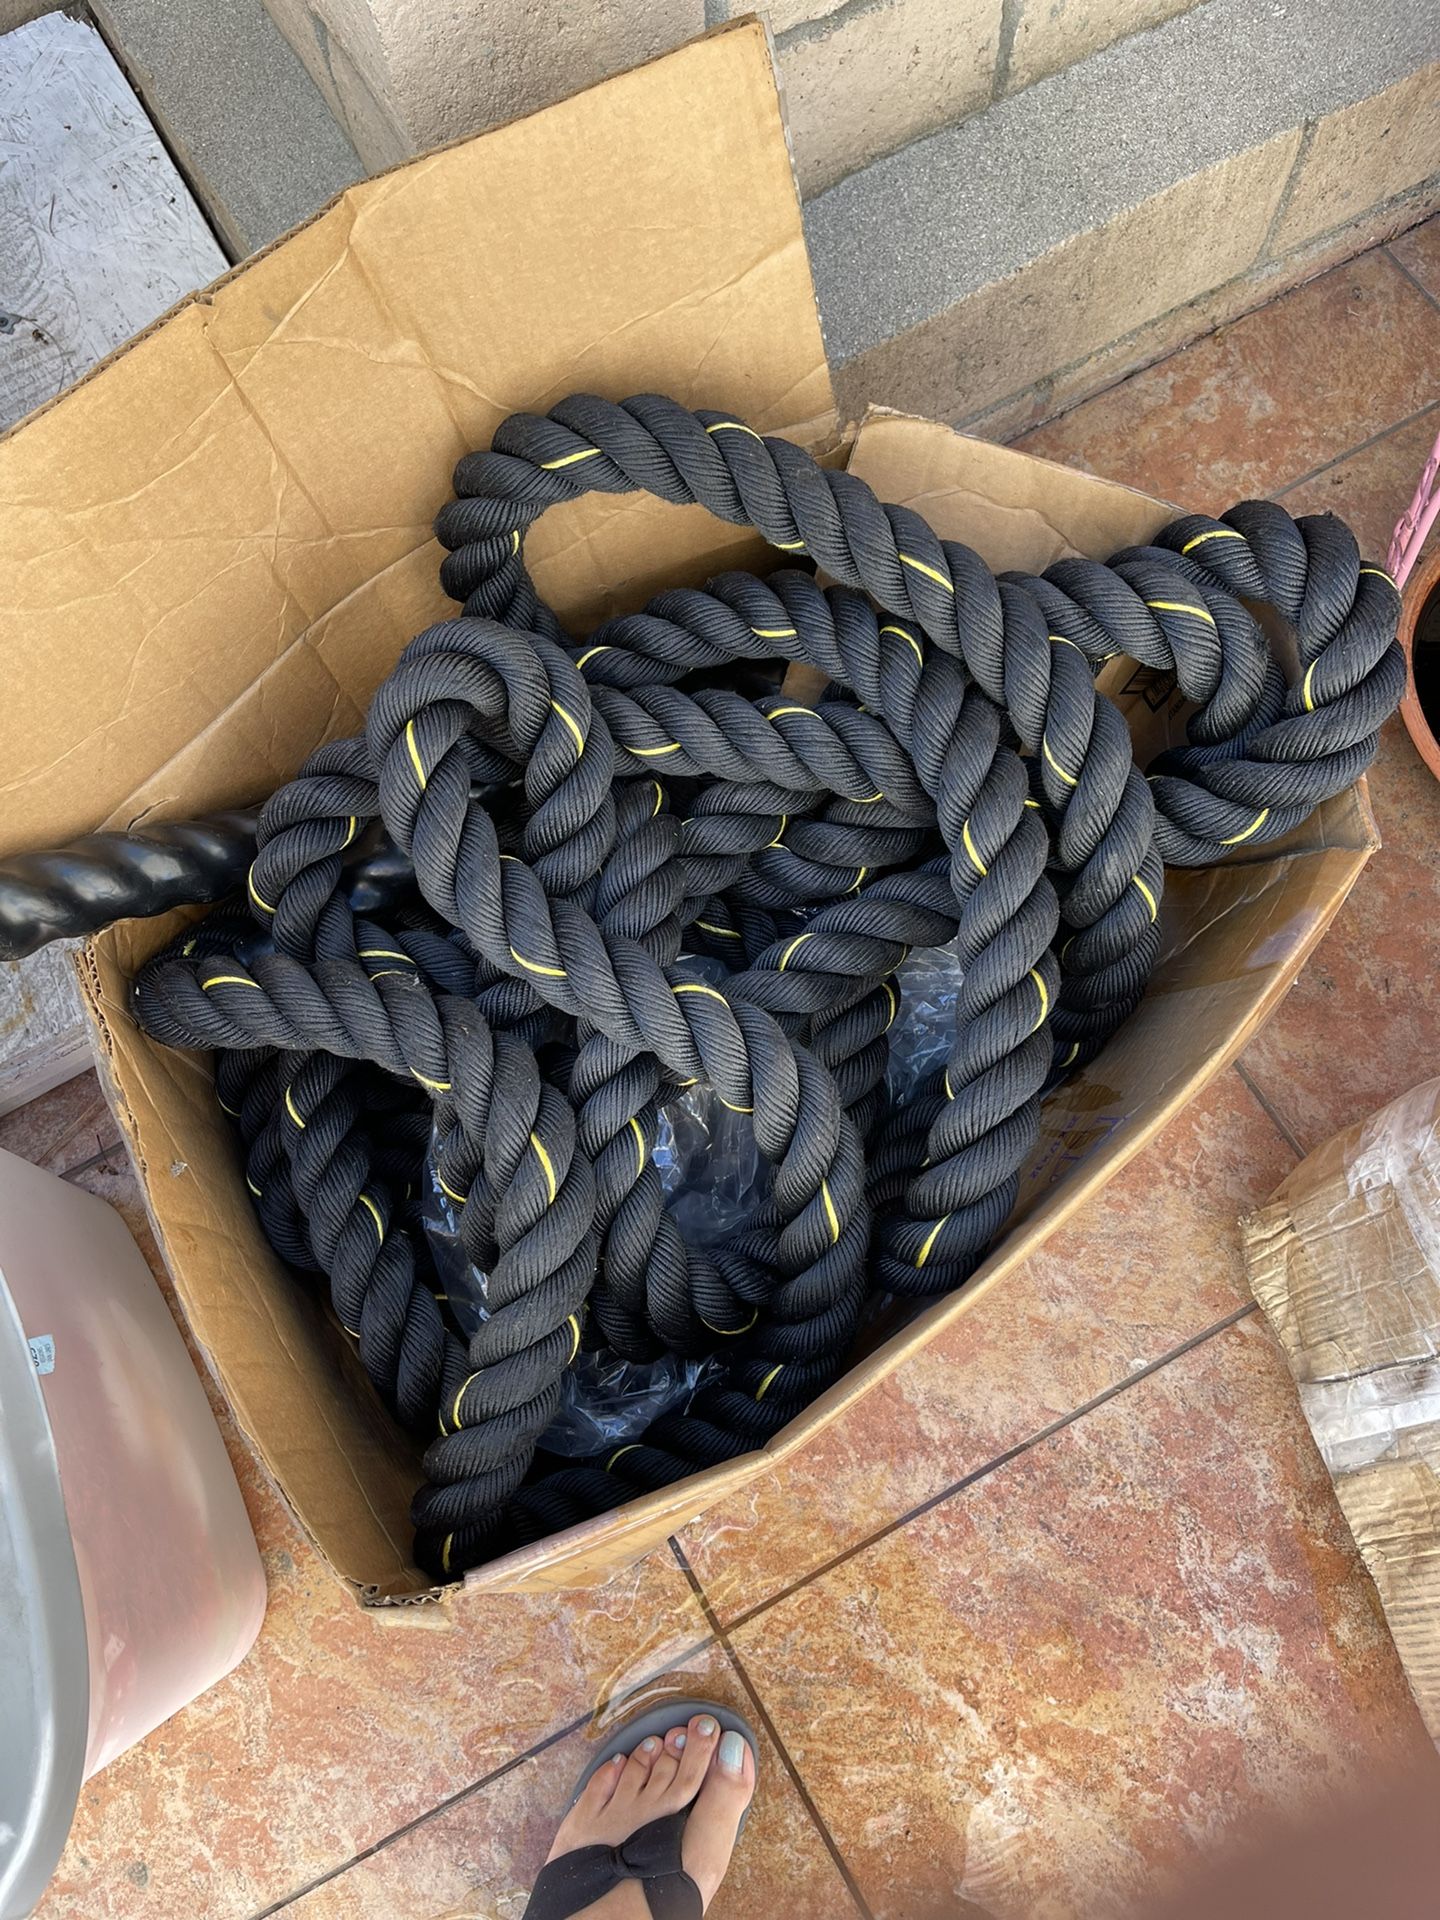 Excersice Rope 